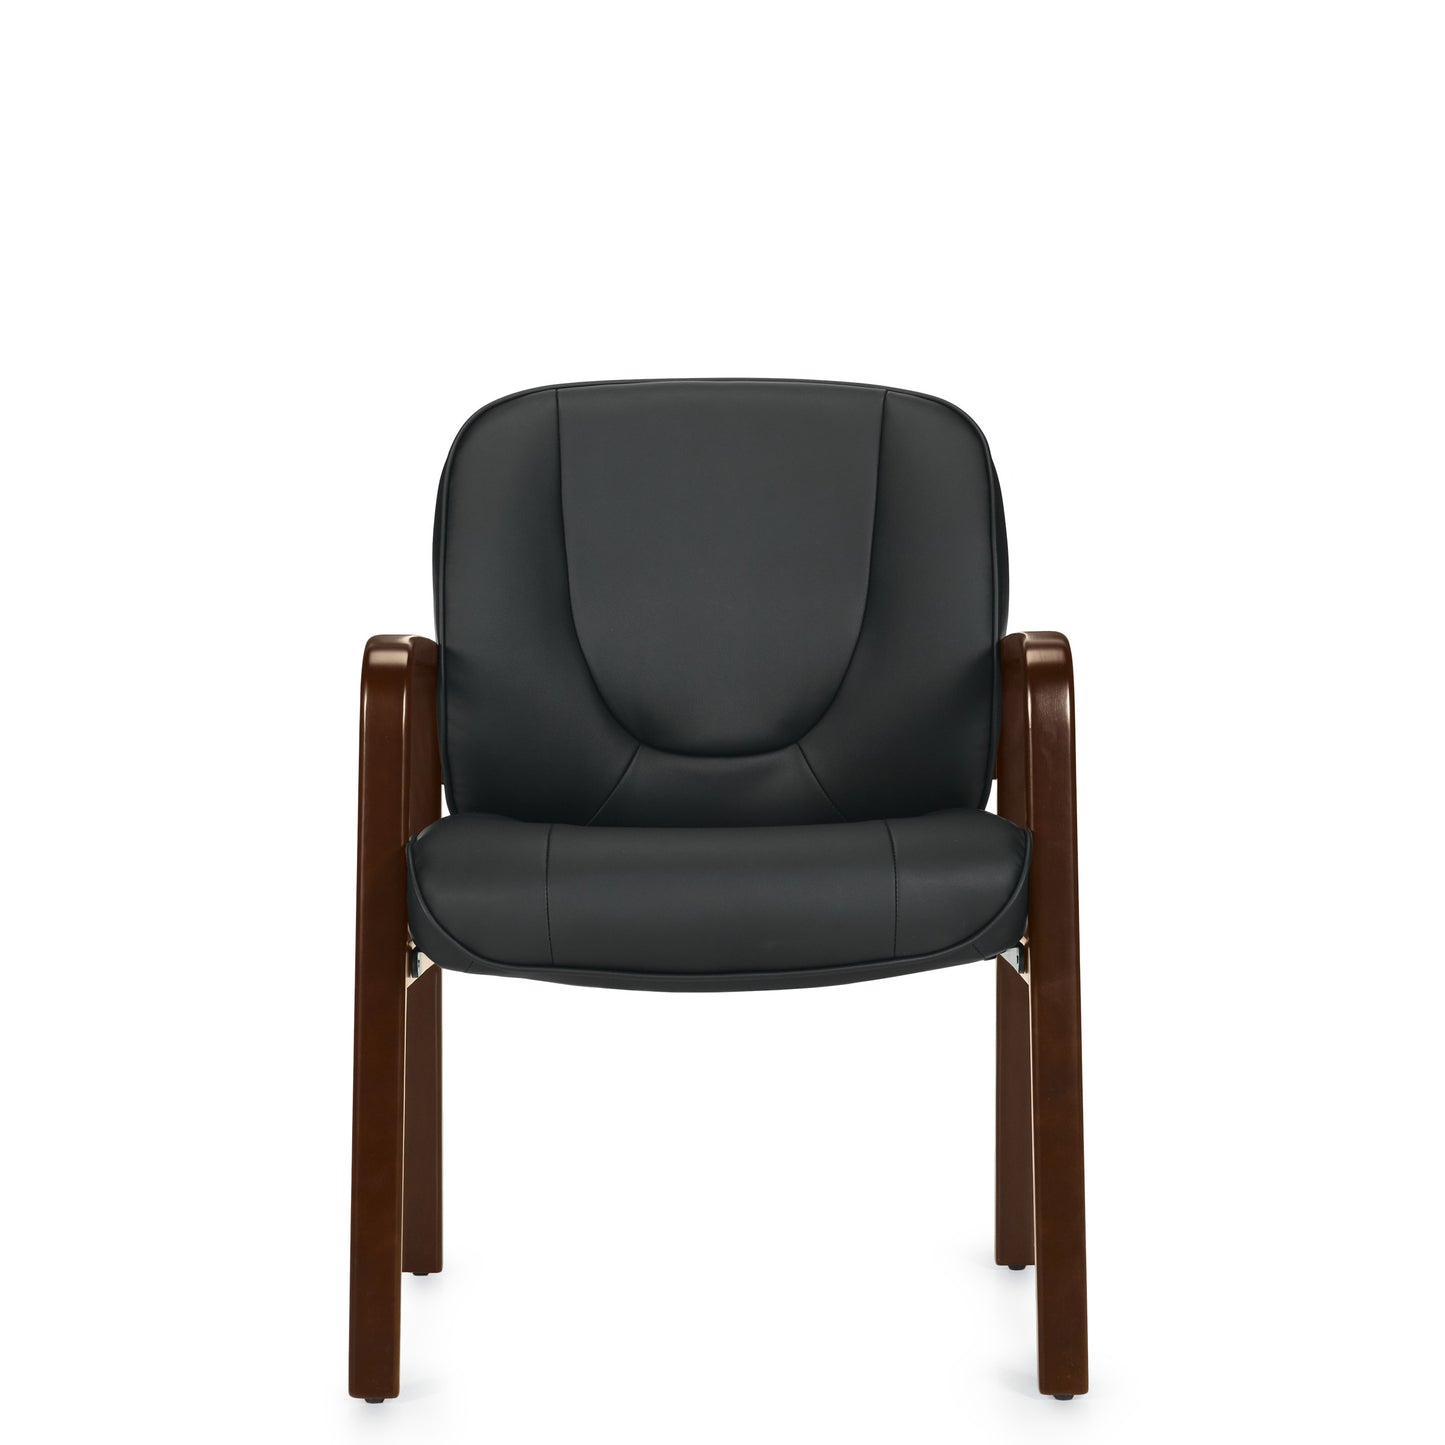 Luxhide Guest Chair with Wood Accents - OTG 11770B